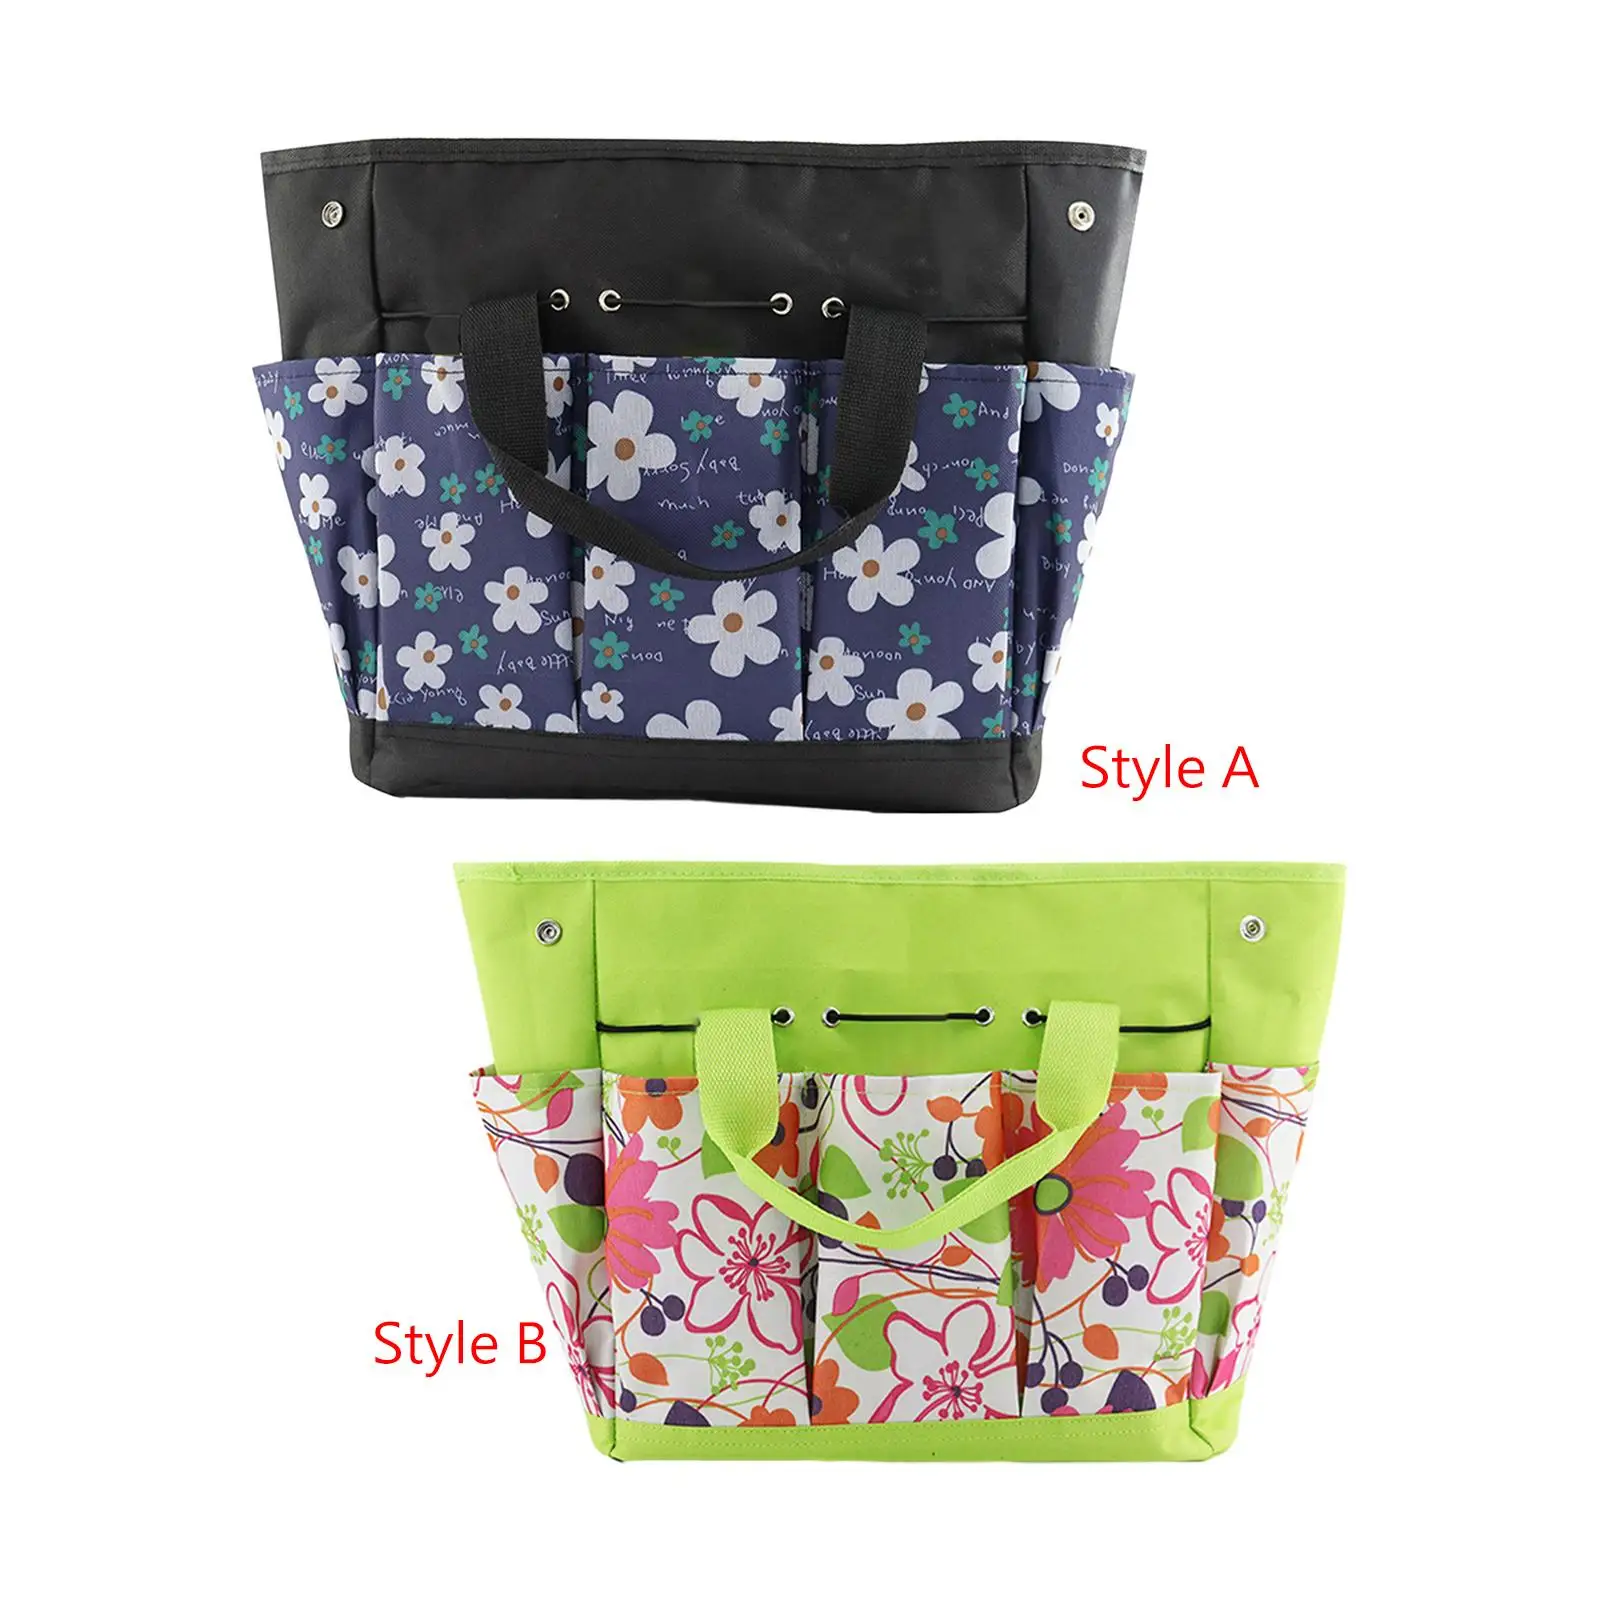 Garden Tool Bag Storage Tote Organizer Durable Universal Indoor and Outdoor Stylish Multifunctional Lightweight Oxford Cloth